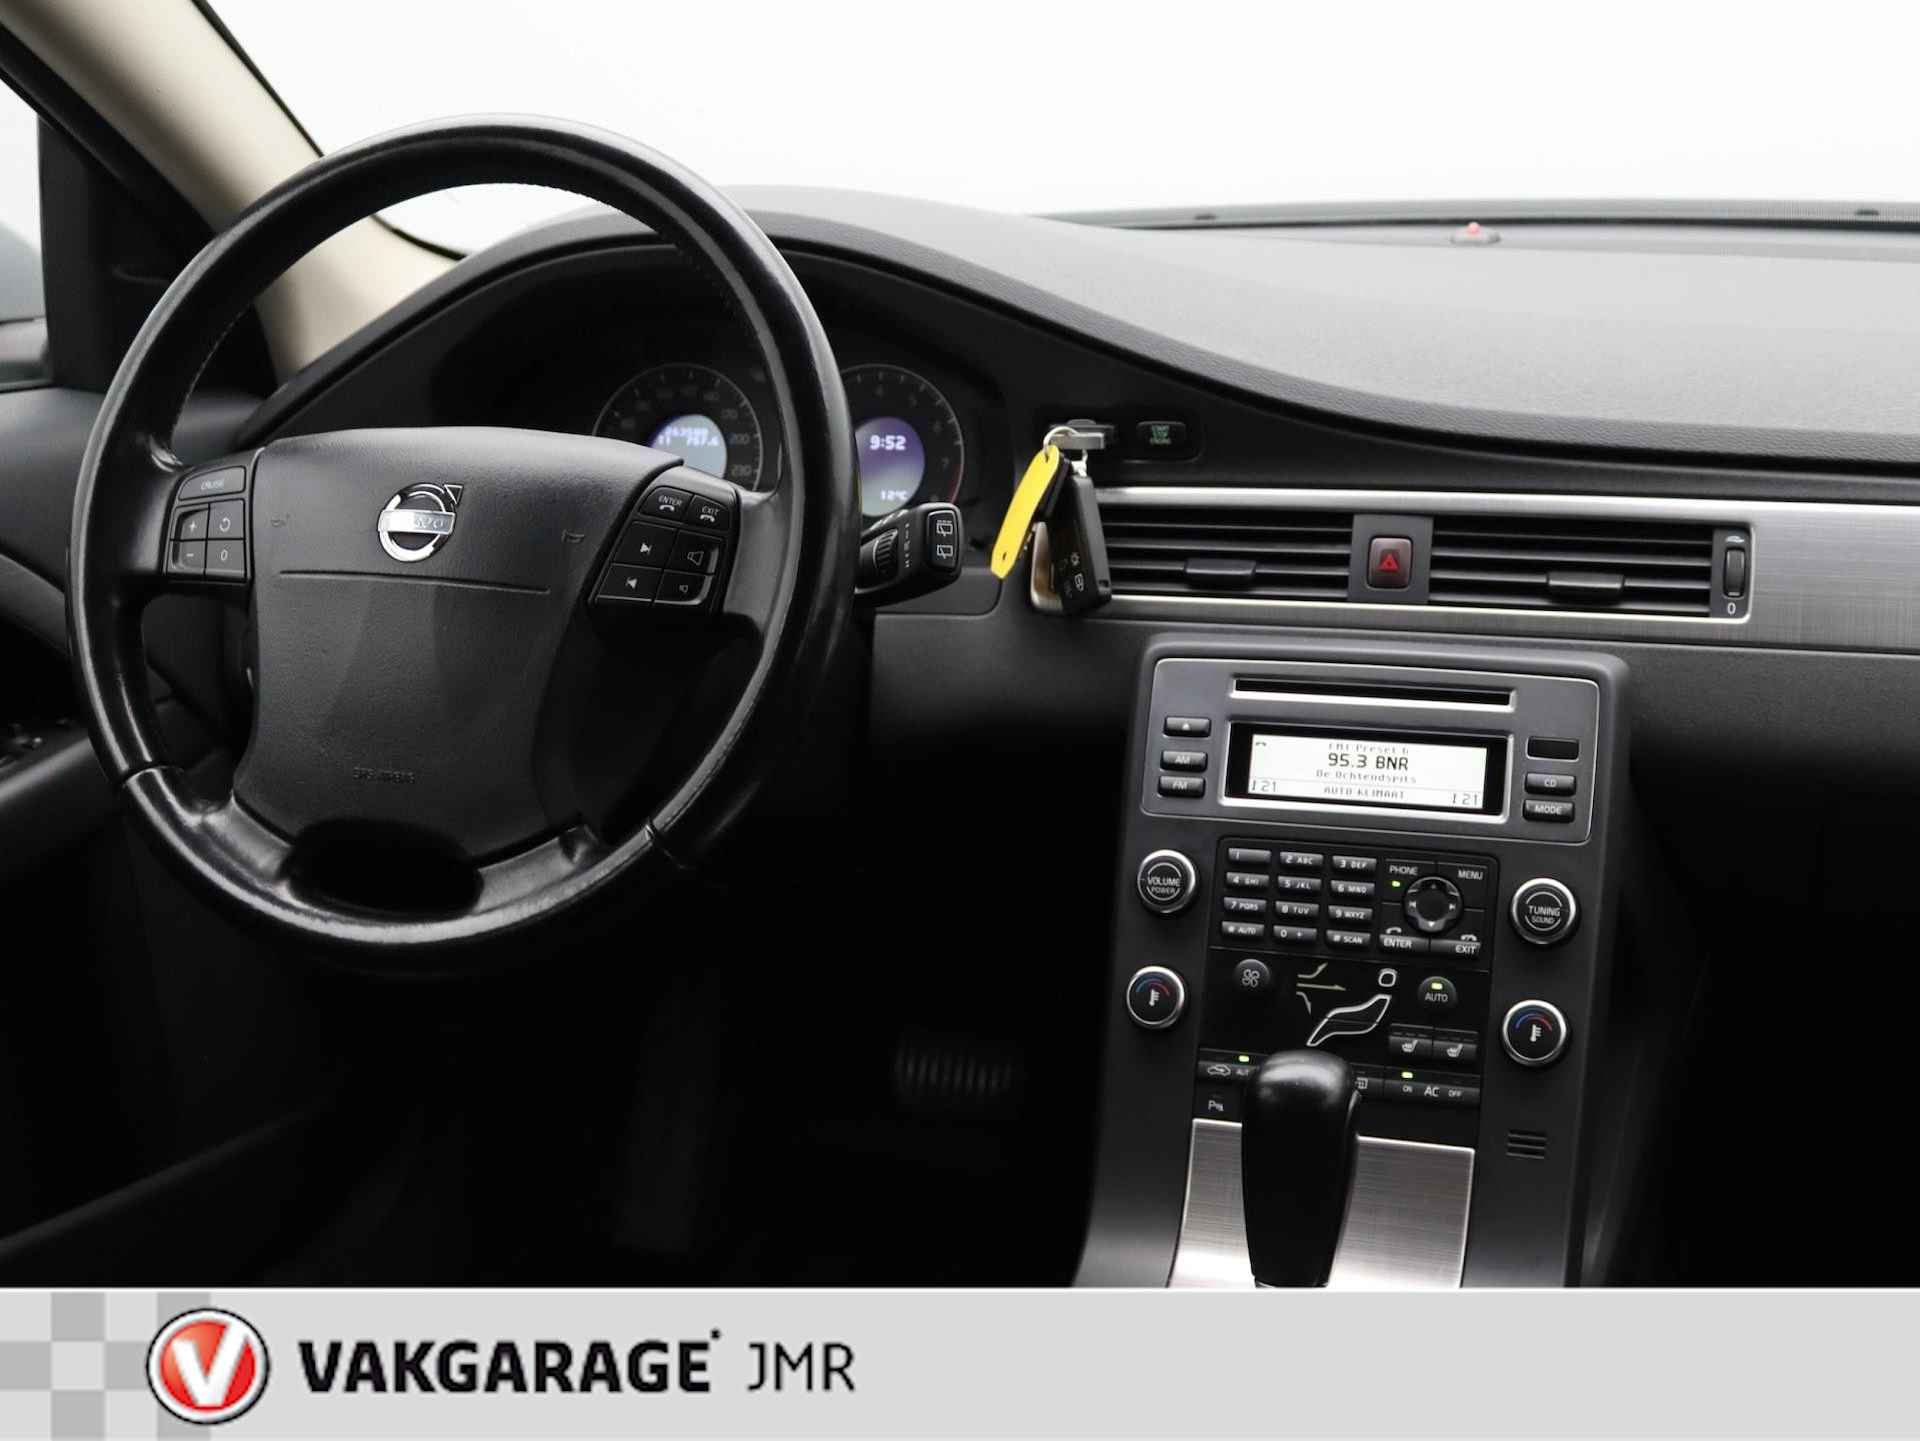 Volvo V70 2.5FT Momentum Youngtimer Trekhaak - PDC Achter - Stoel + Achterbank verwarming - Bluetooth - Climate en Cruise Control - 27/39